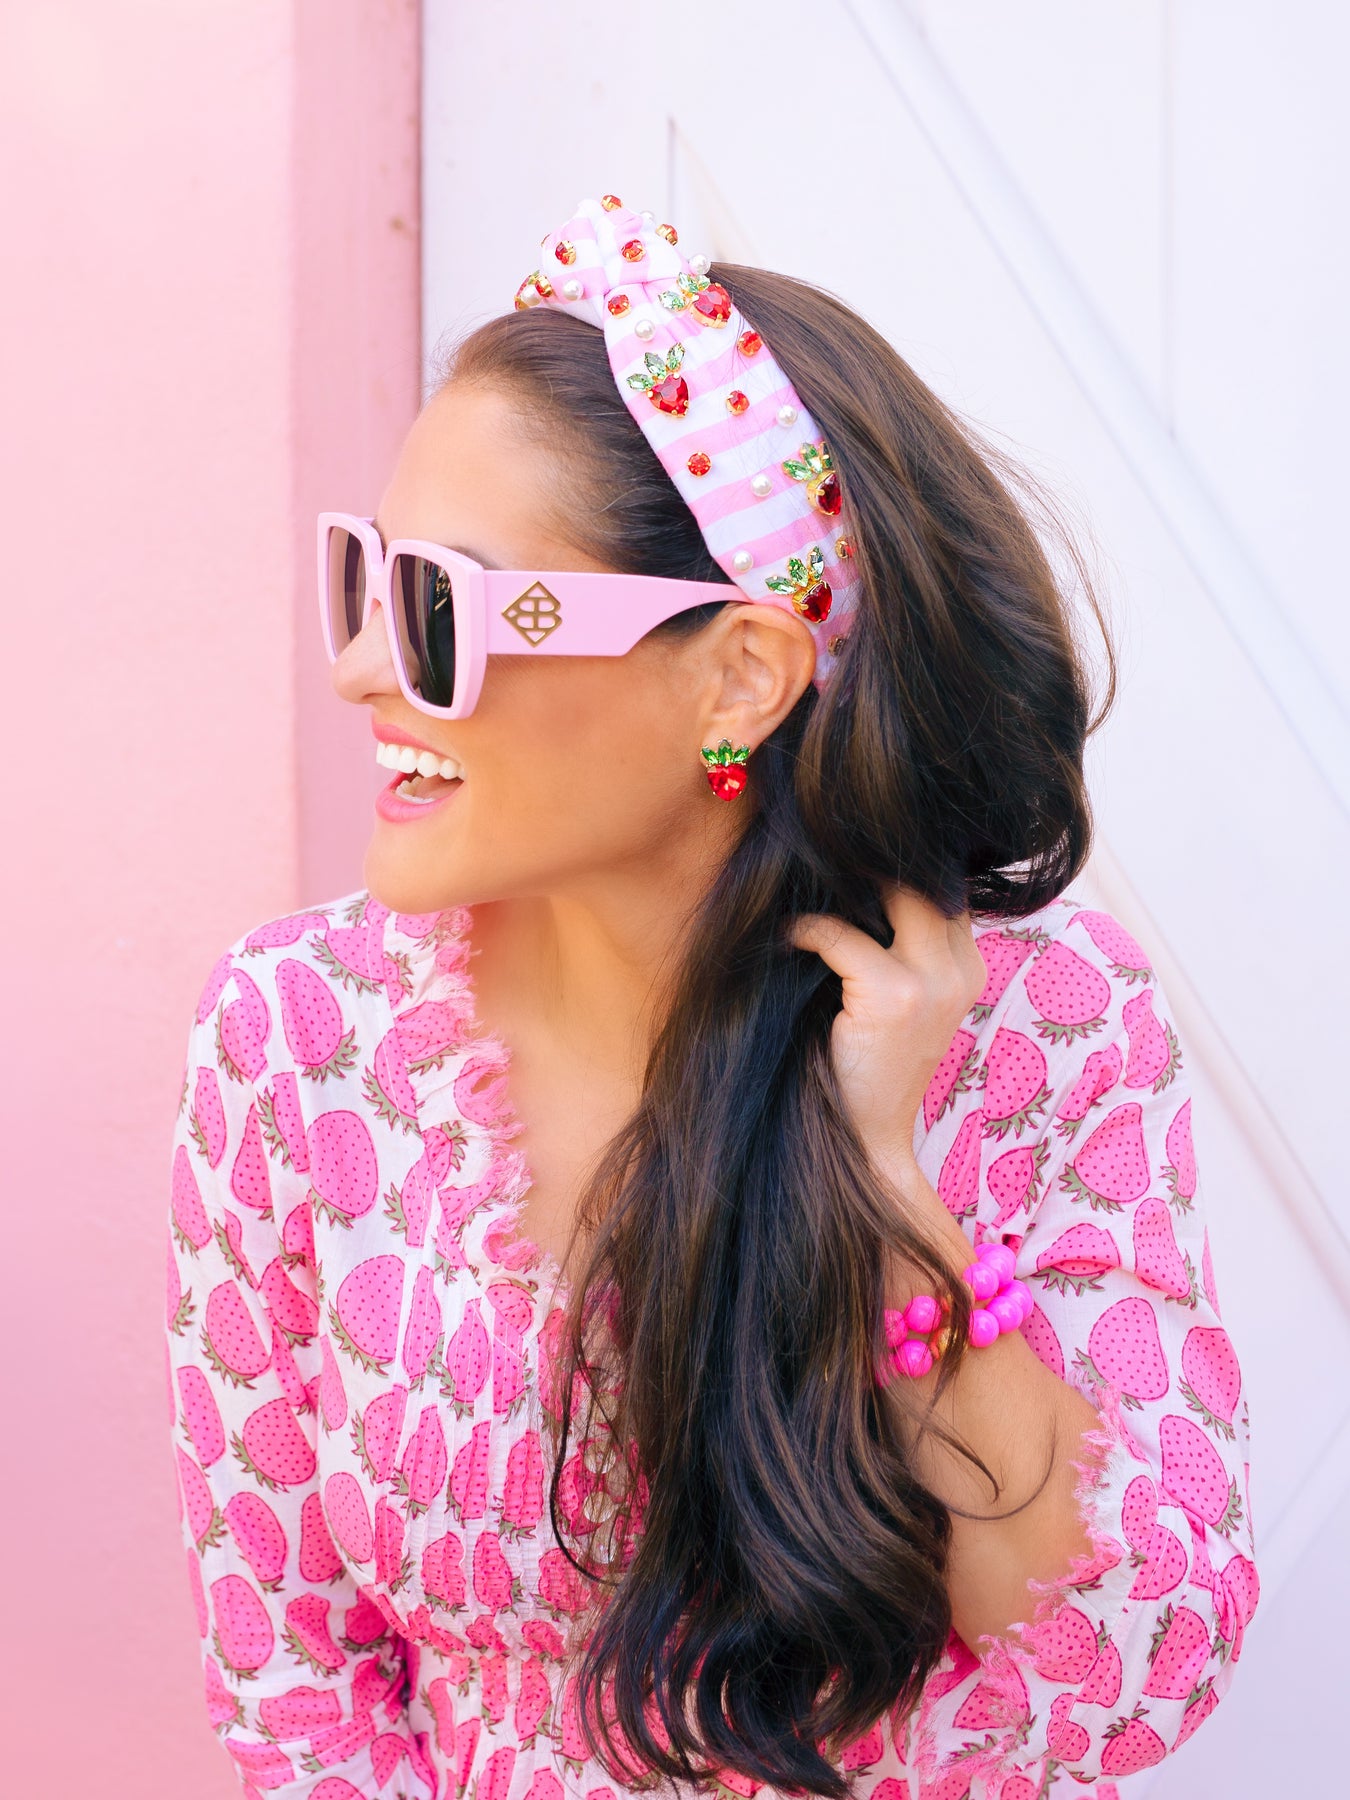 Perfect Pink BC Square Sunglasses with Polarized Lenses – Brianna Cannon